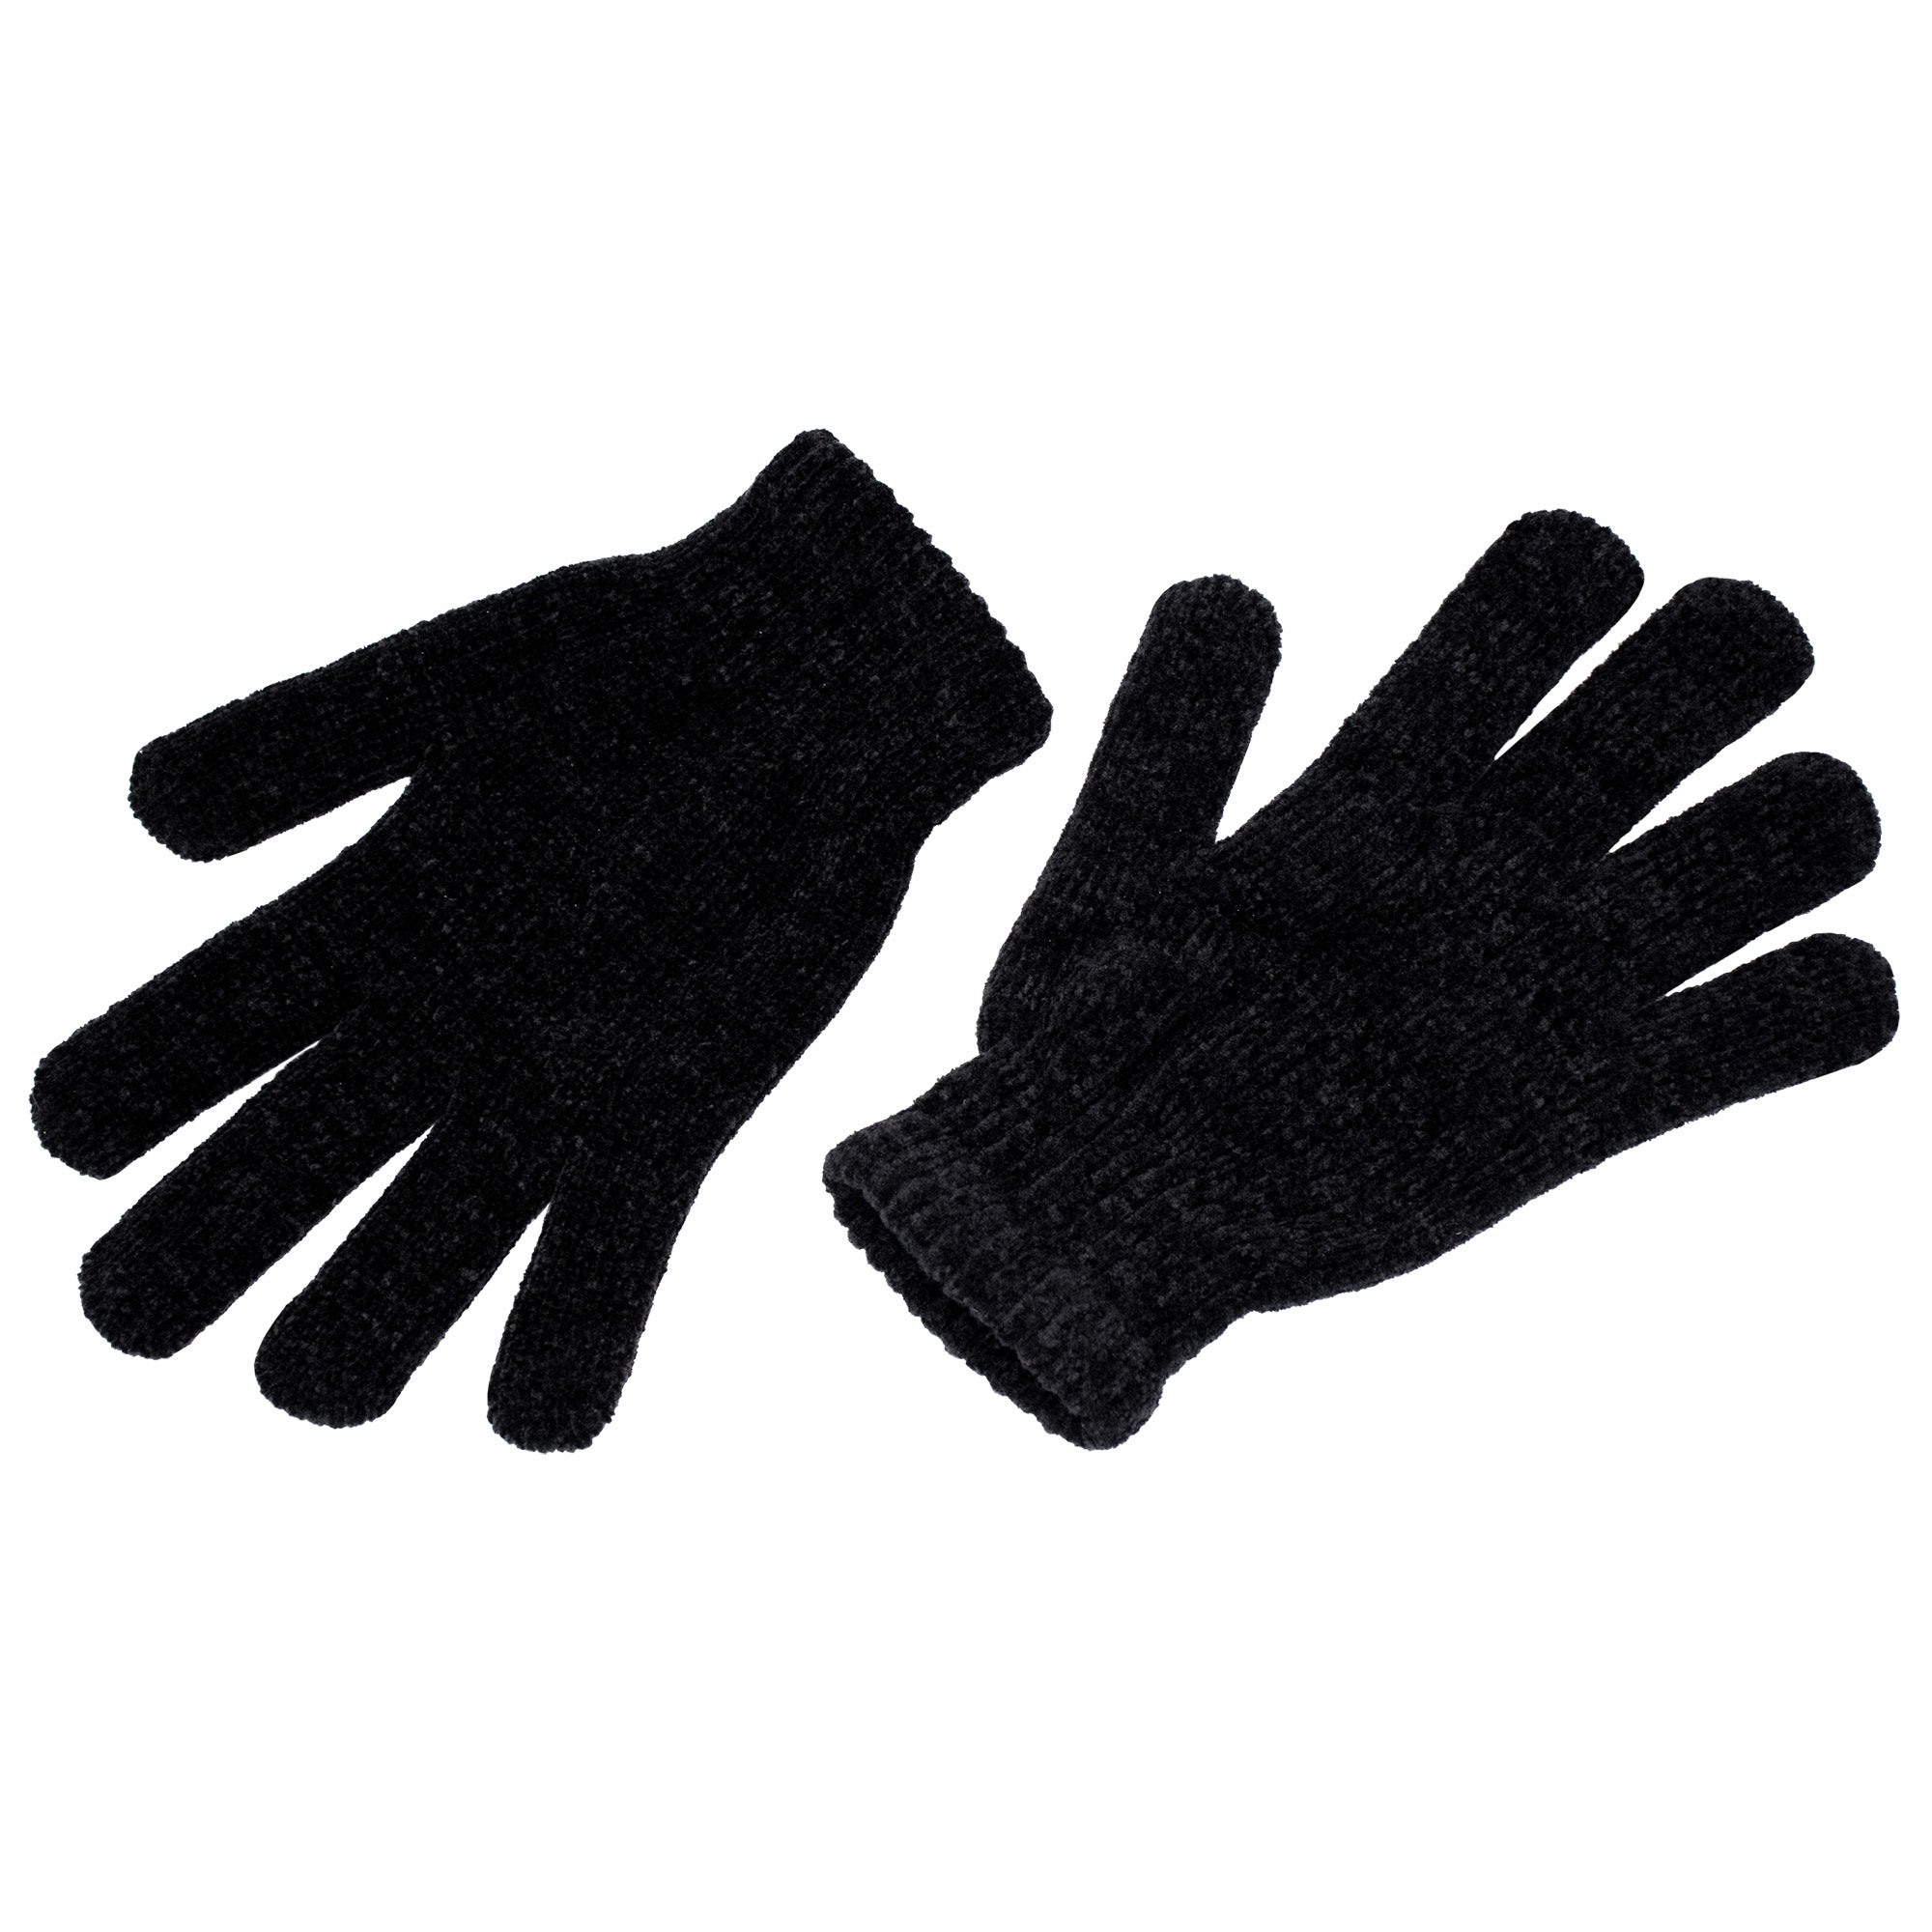 Wholesale Winter Unisex Chenille Gloves in Black- One Size Fits Most - Bulk Case of 96